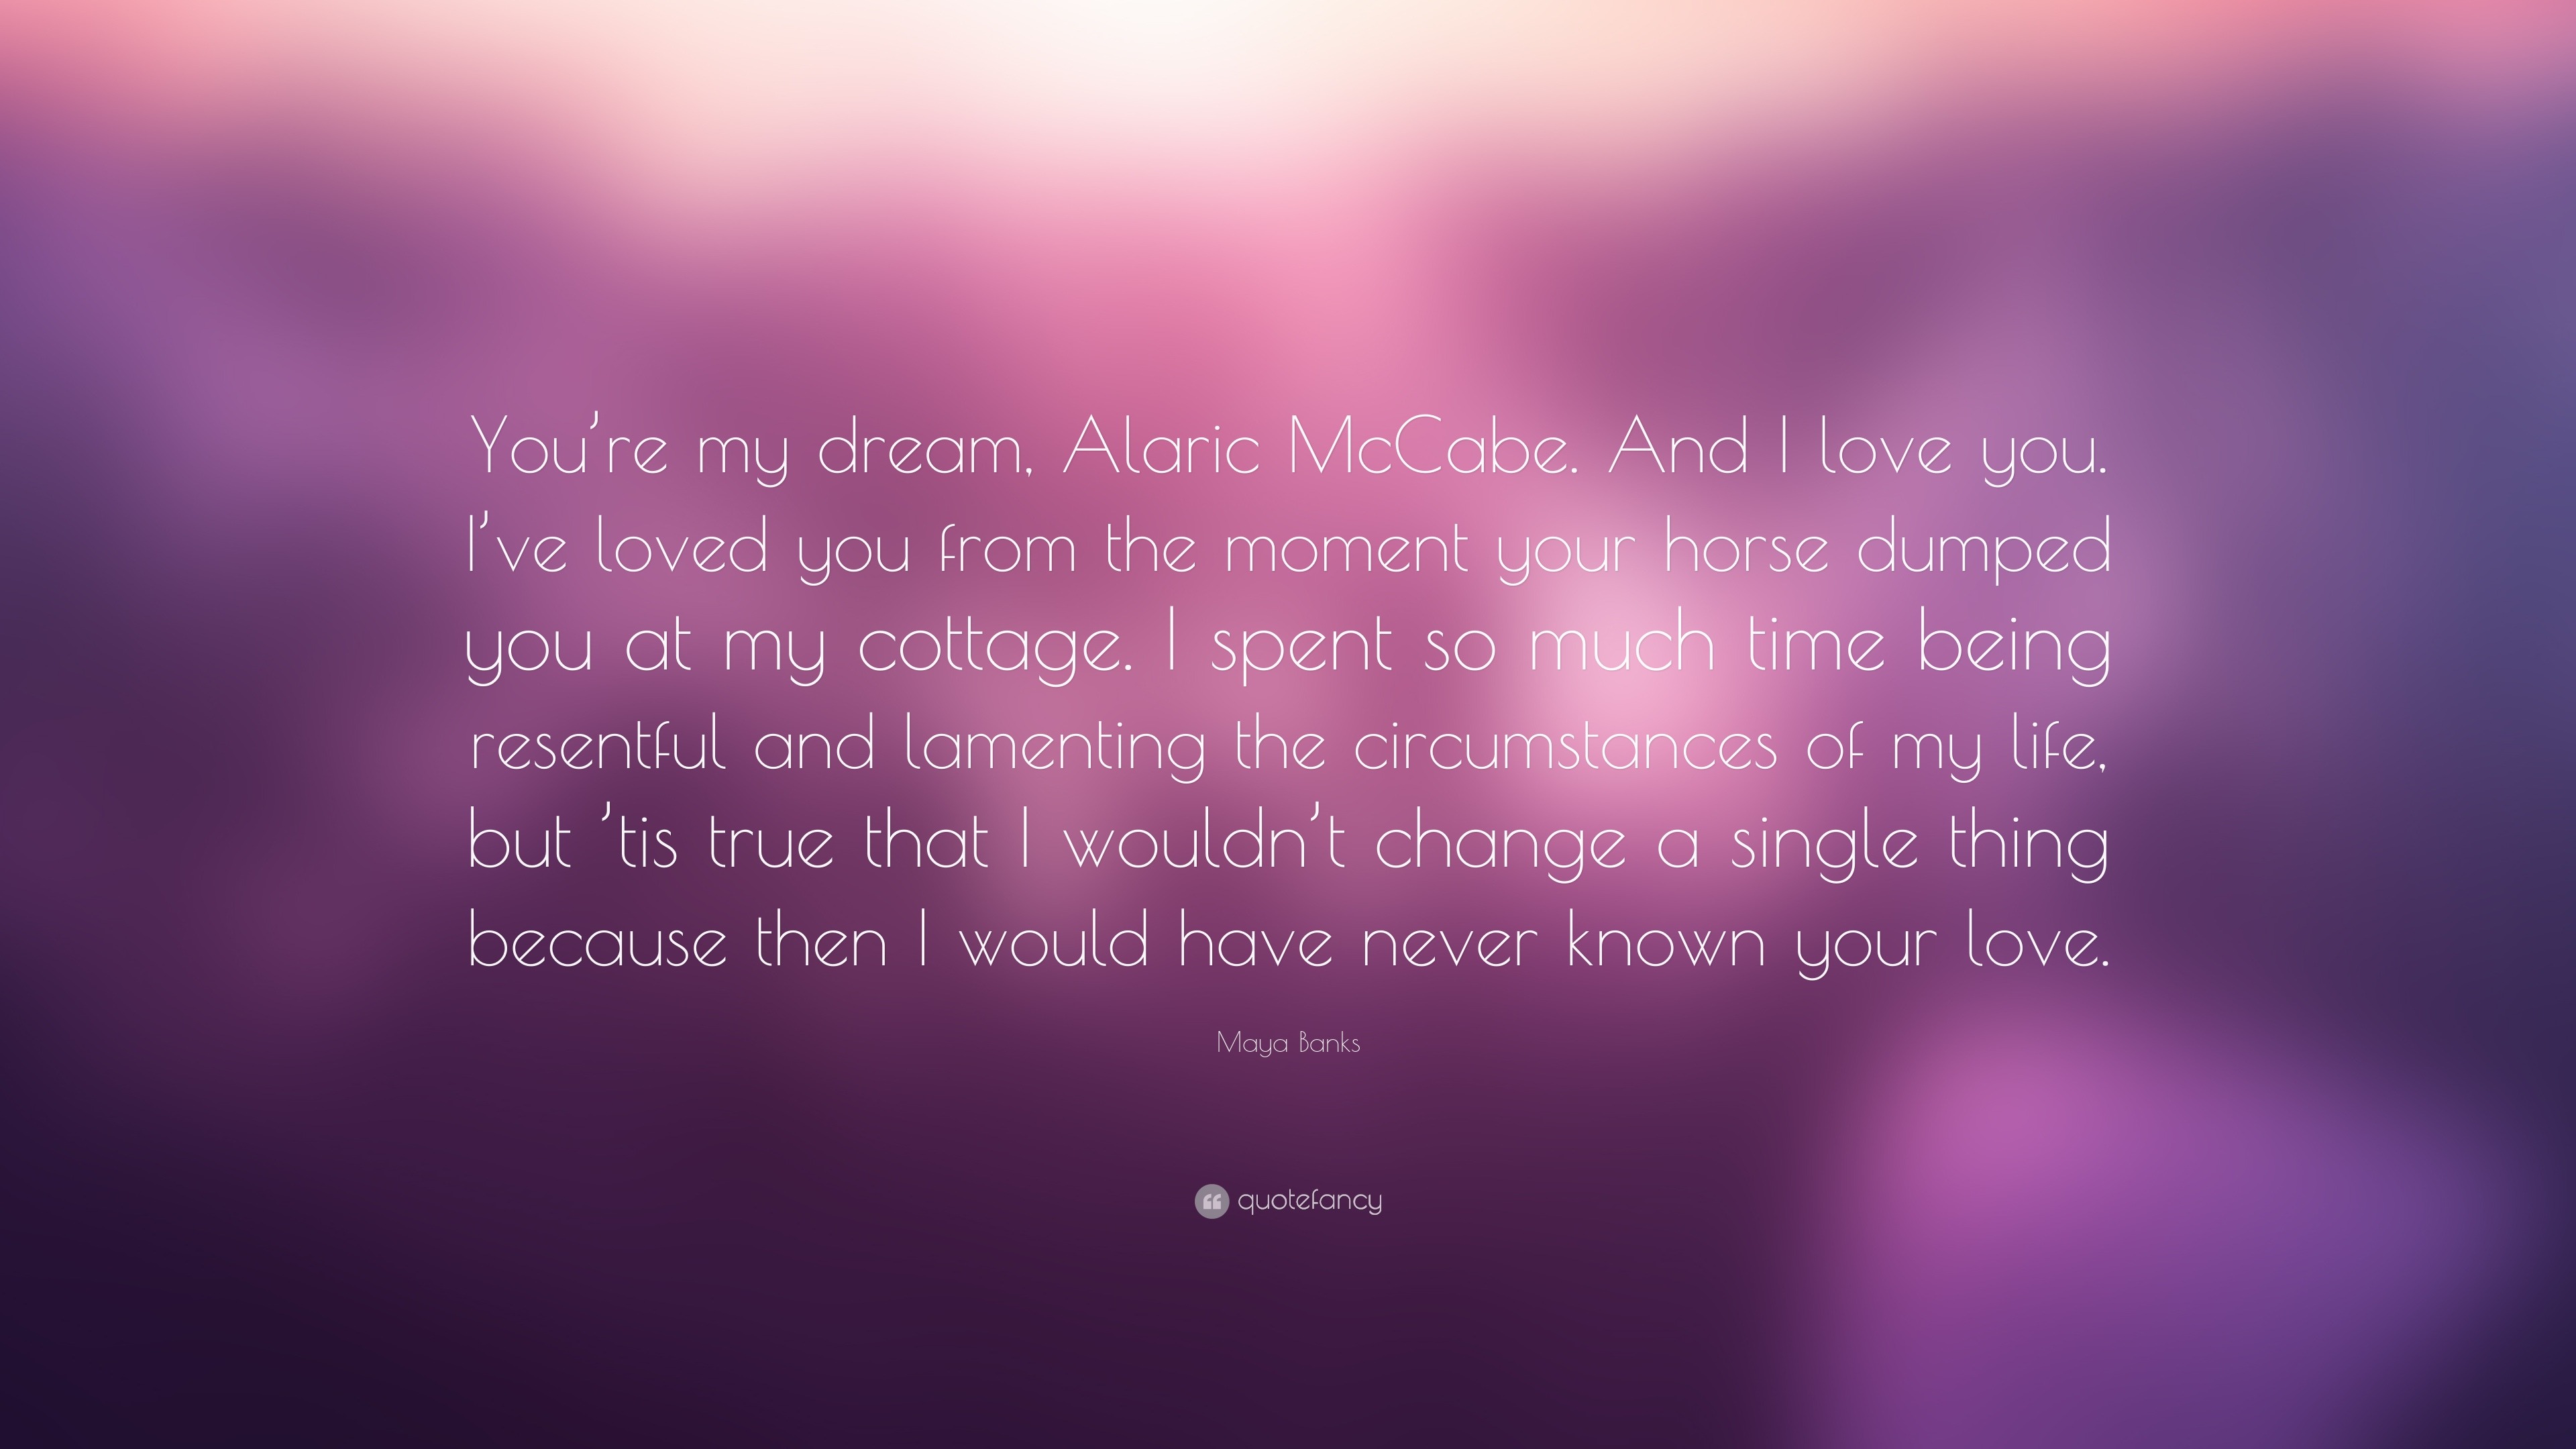 Maya Banks Quote: "You're my dream, Alaric McCabe. And I ...